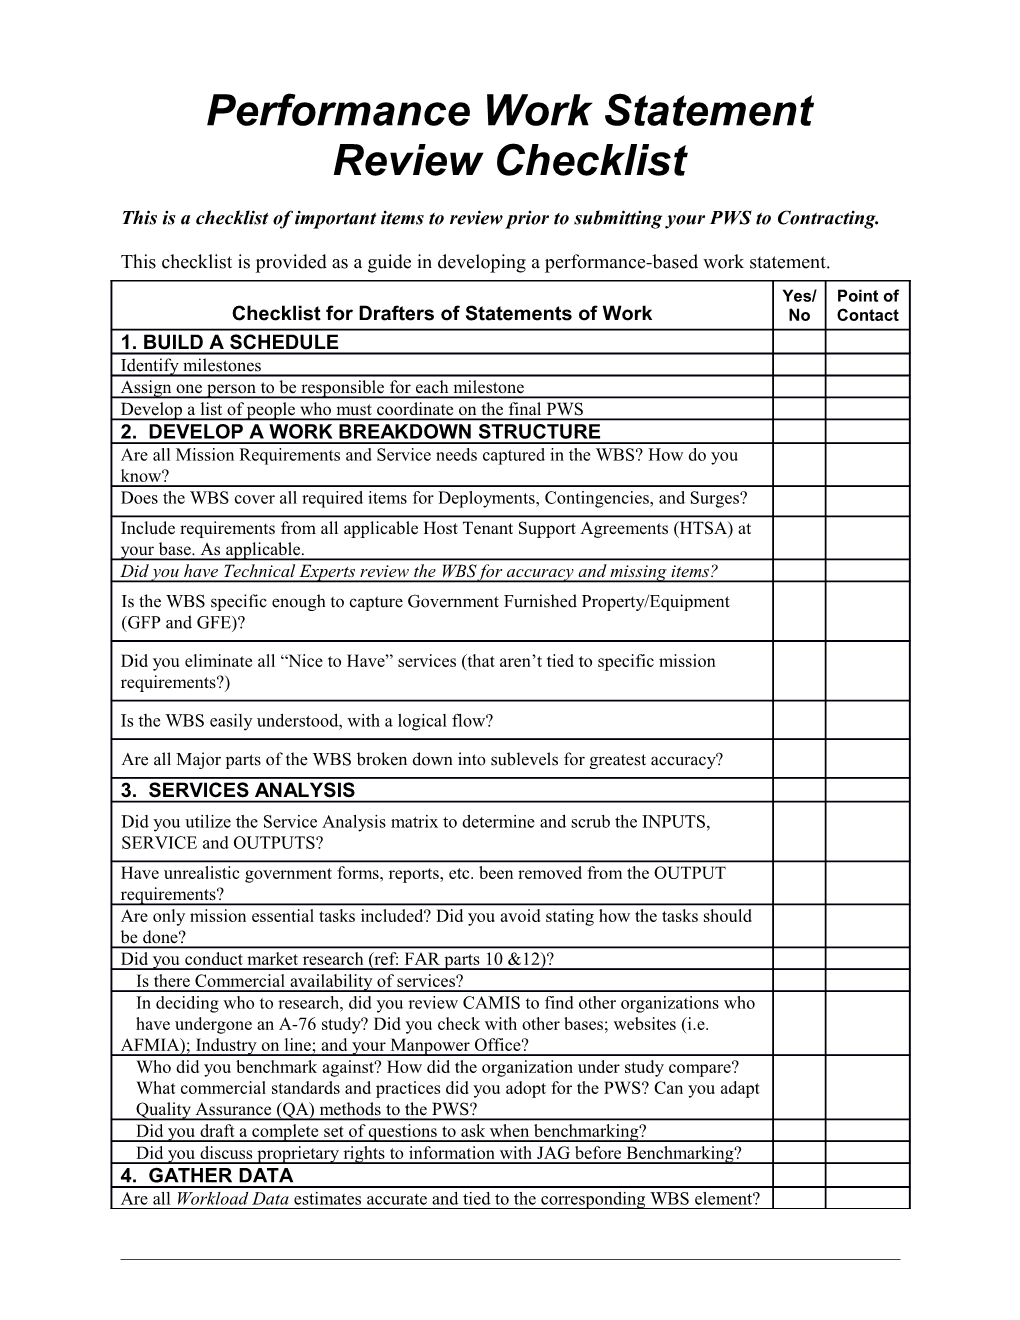 This Is a Checklist of Important Items to Review Prior to Submitting Your PWS to Contracting